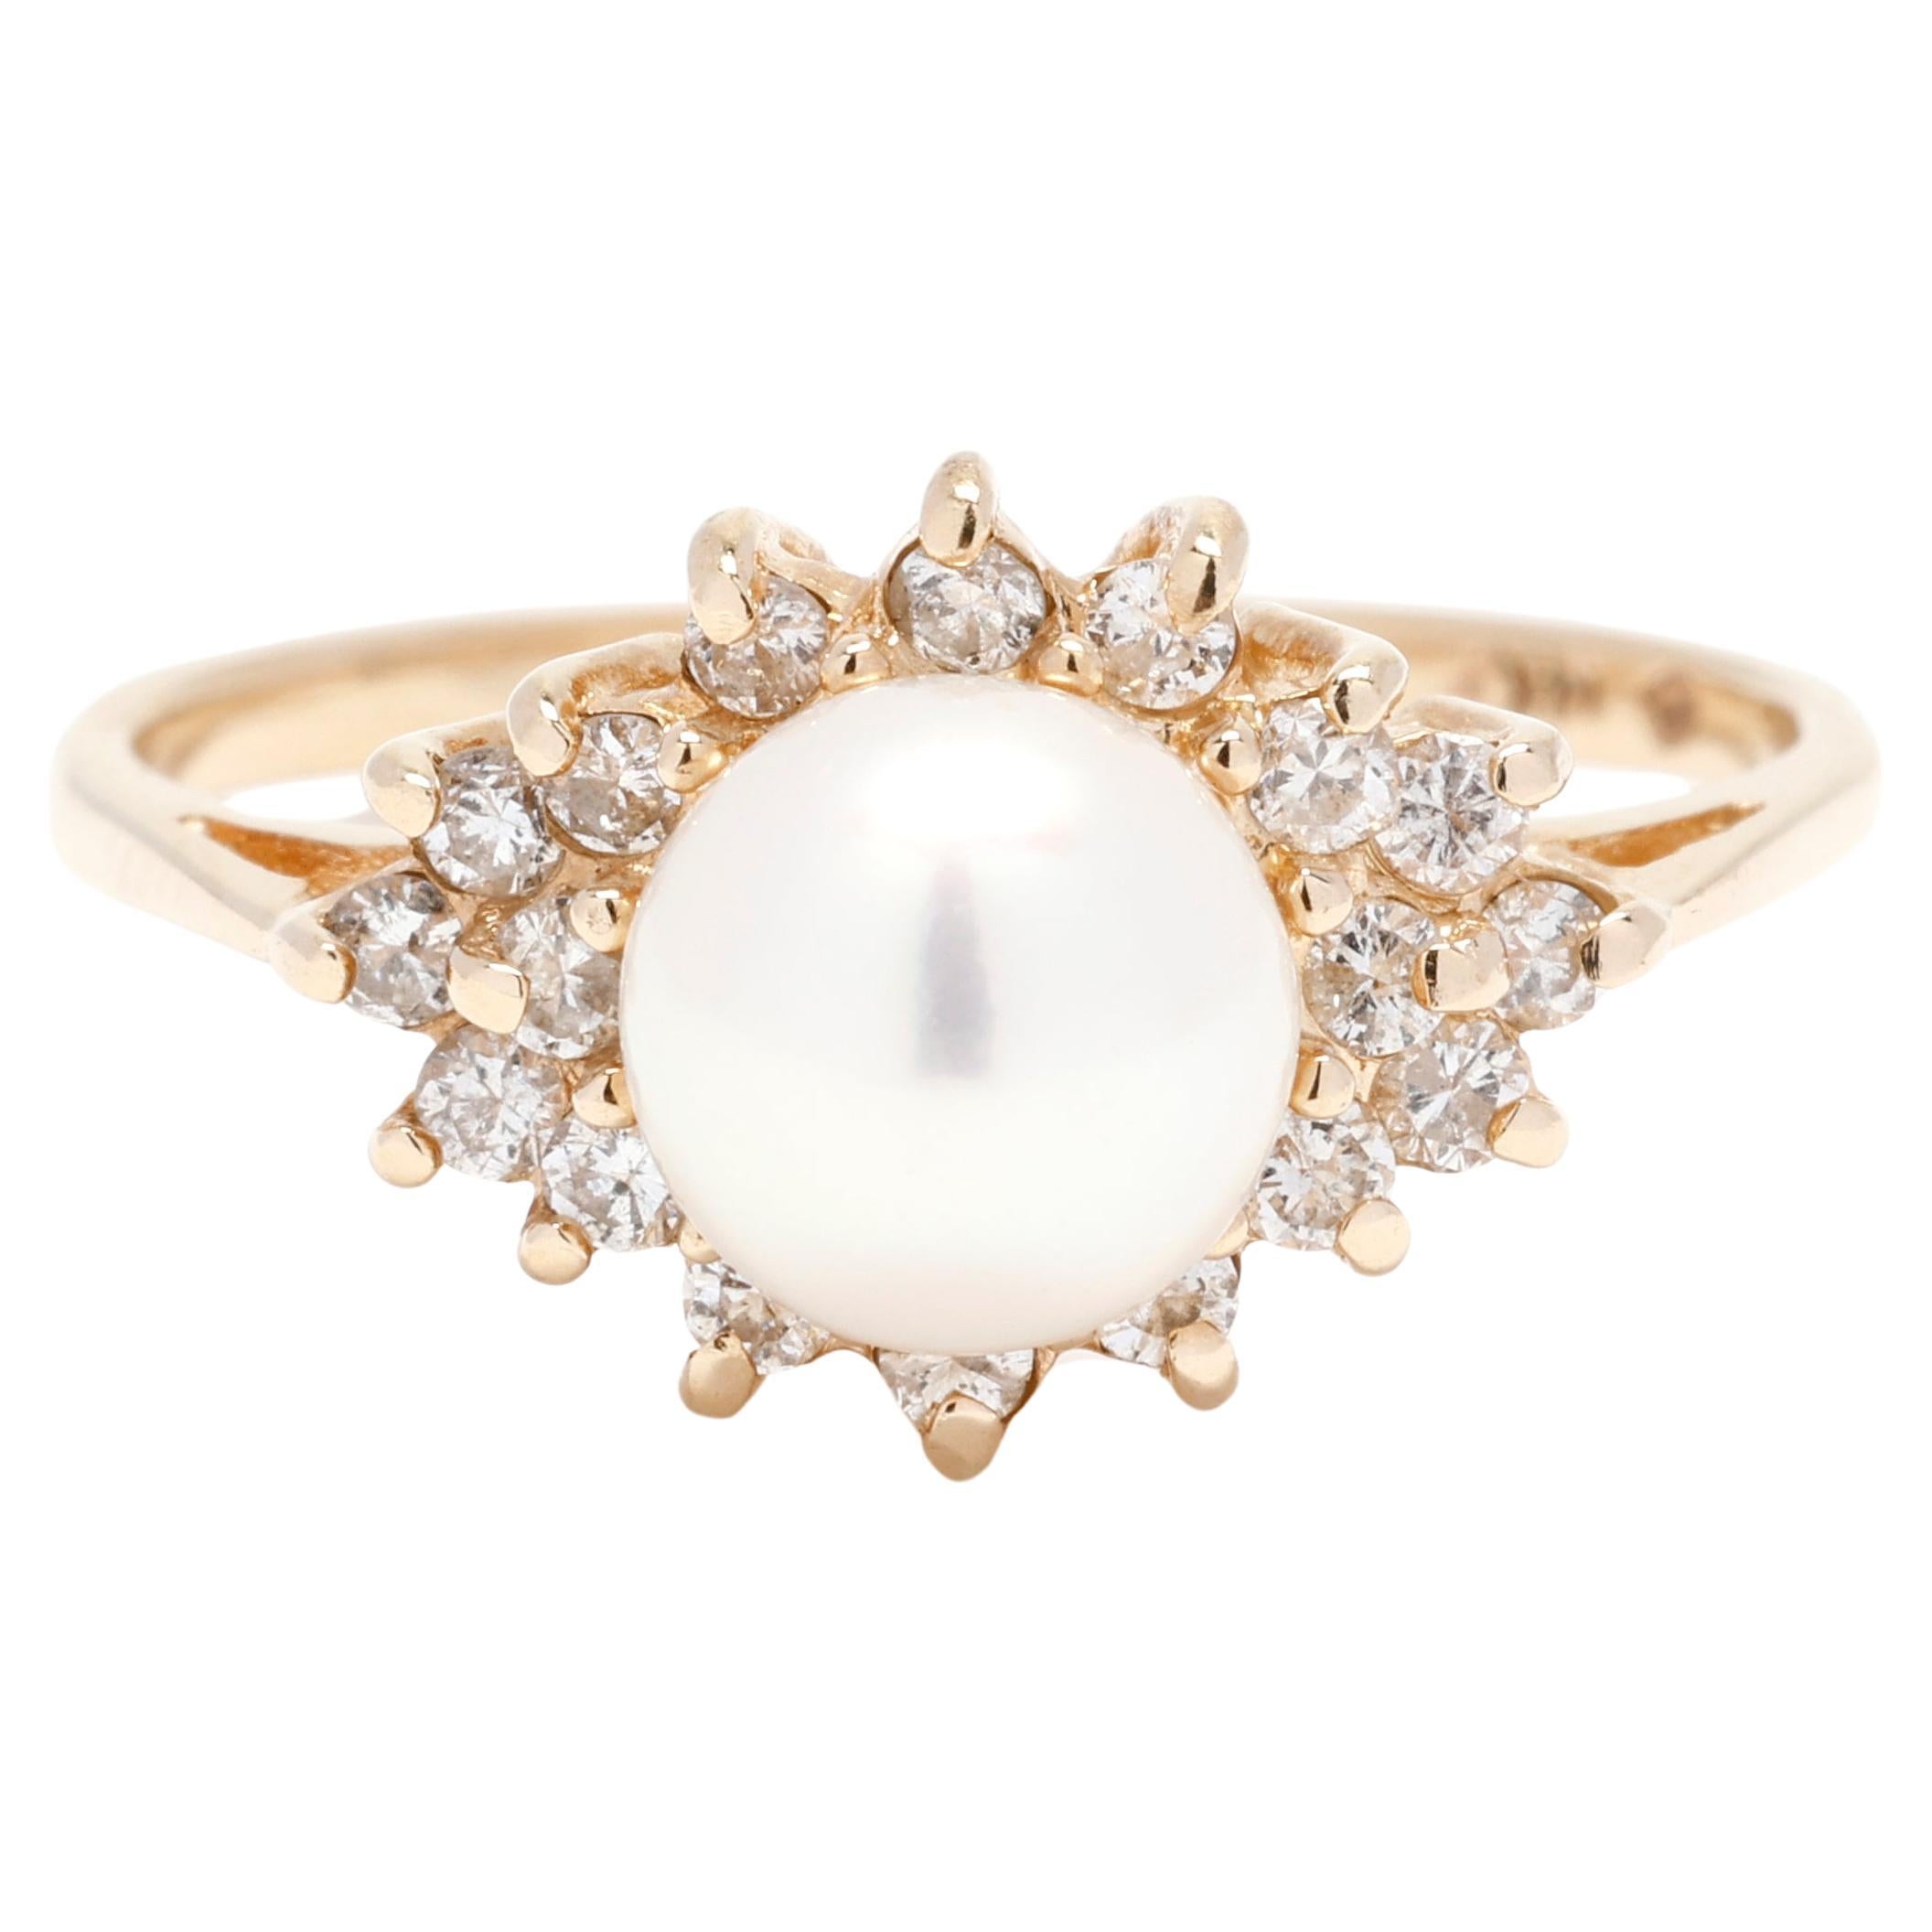  0.25ctw Diamond and Pearl Cluster Ring, 14k Yellow Gold, Ring Size 5.5